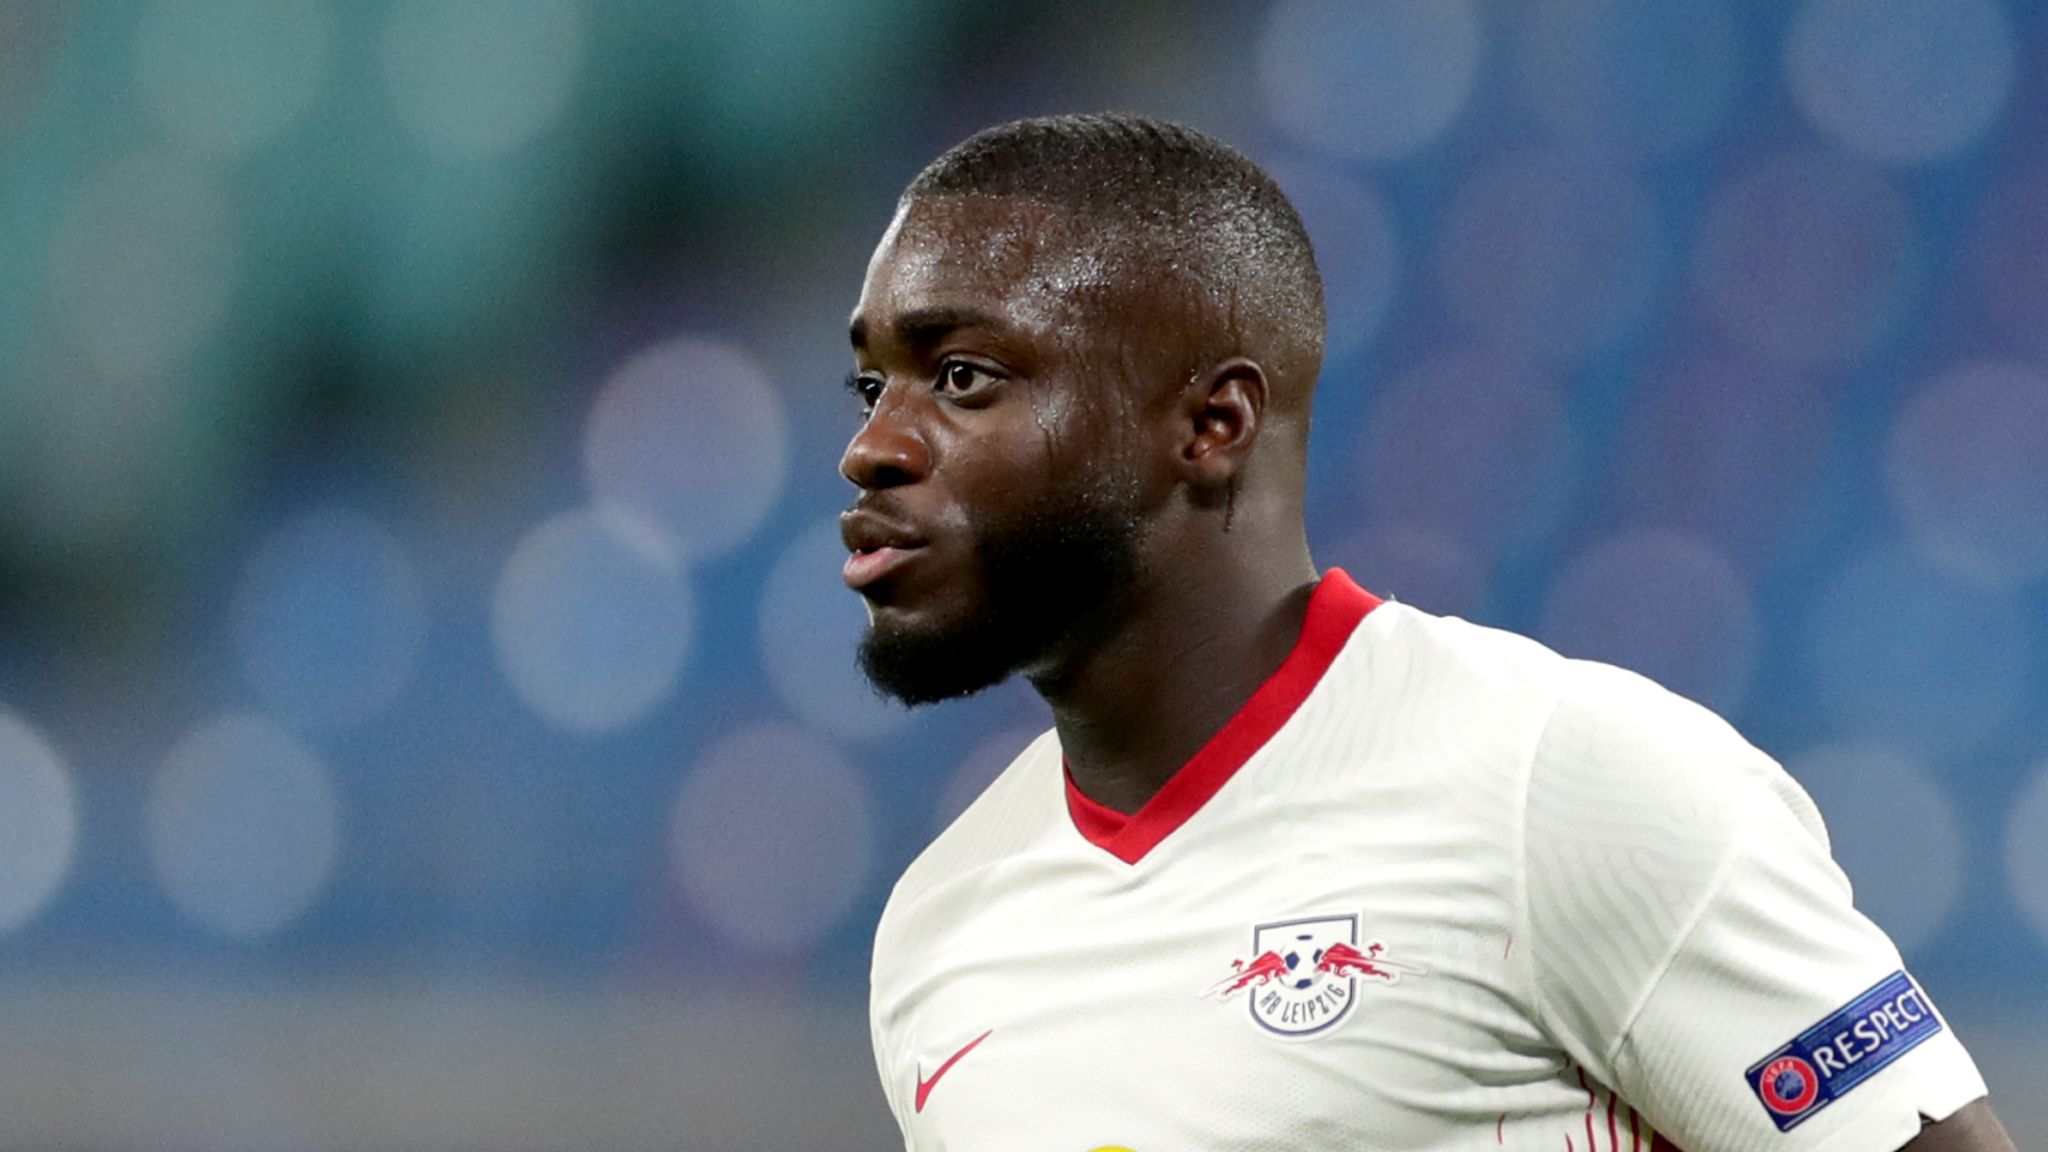 Dayot Upamecano transfer news: Bayern Munich set to sign Liverpool and Chelsea target from RB Leipzig